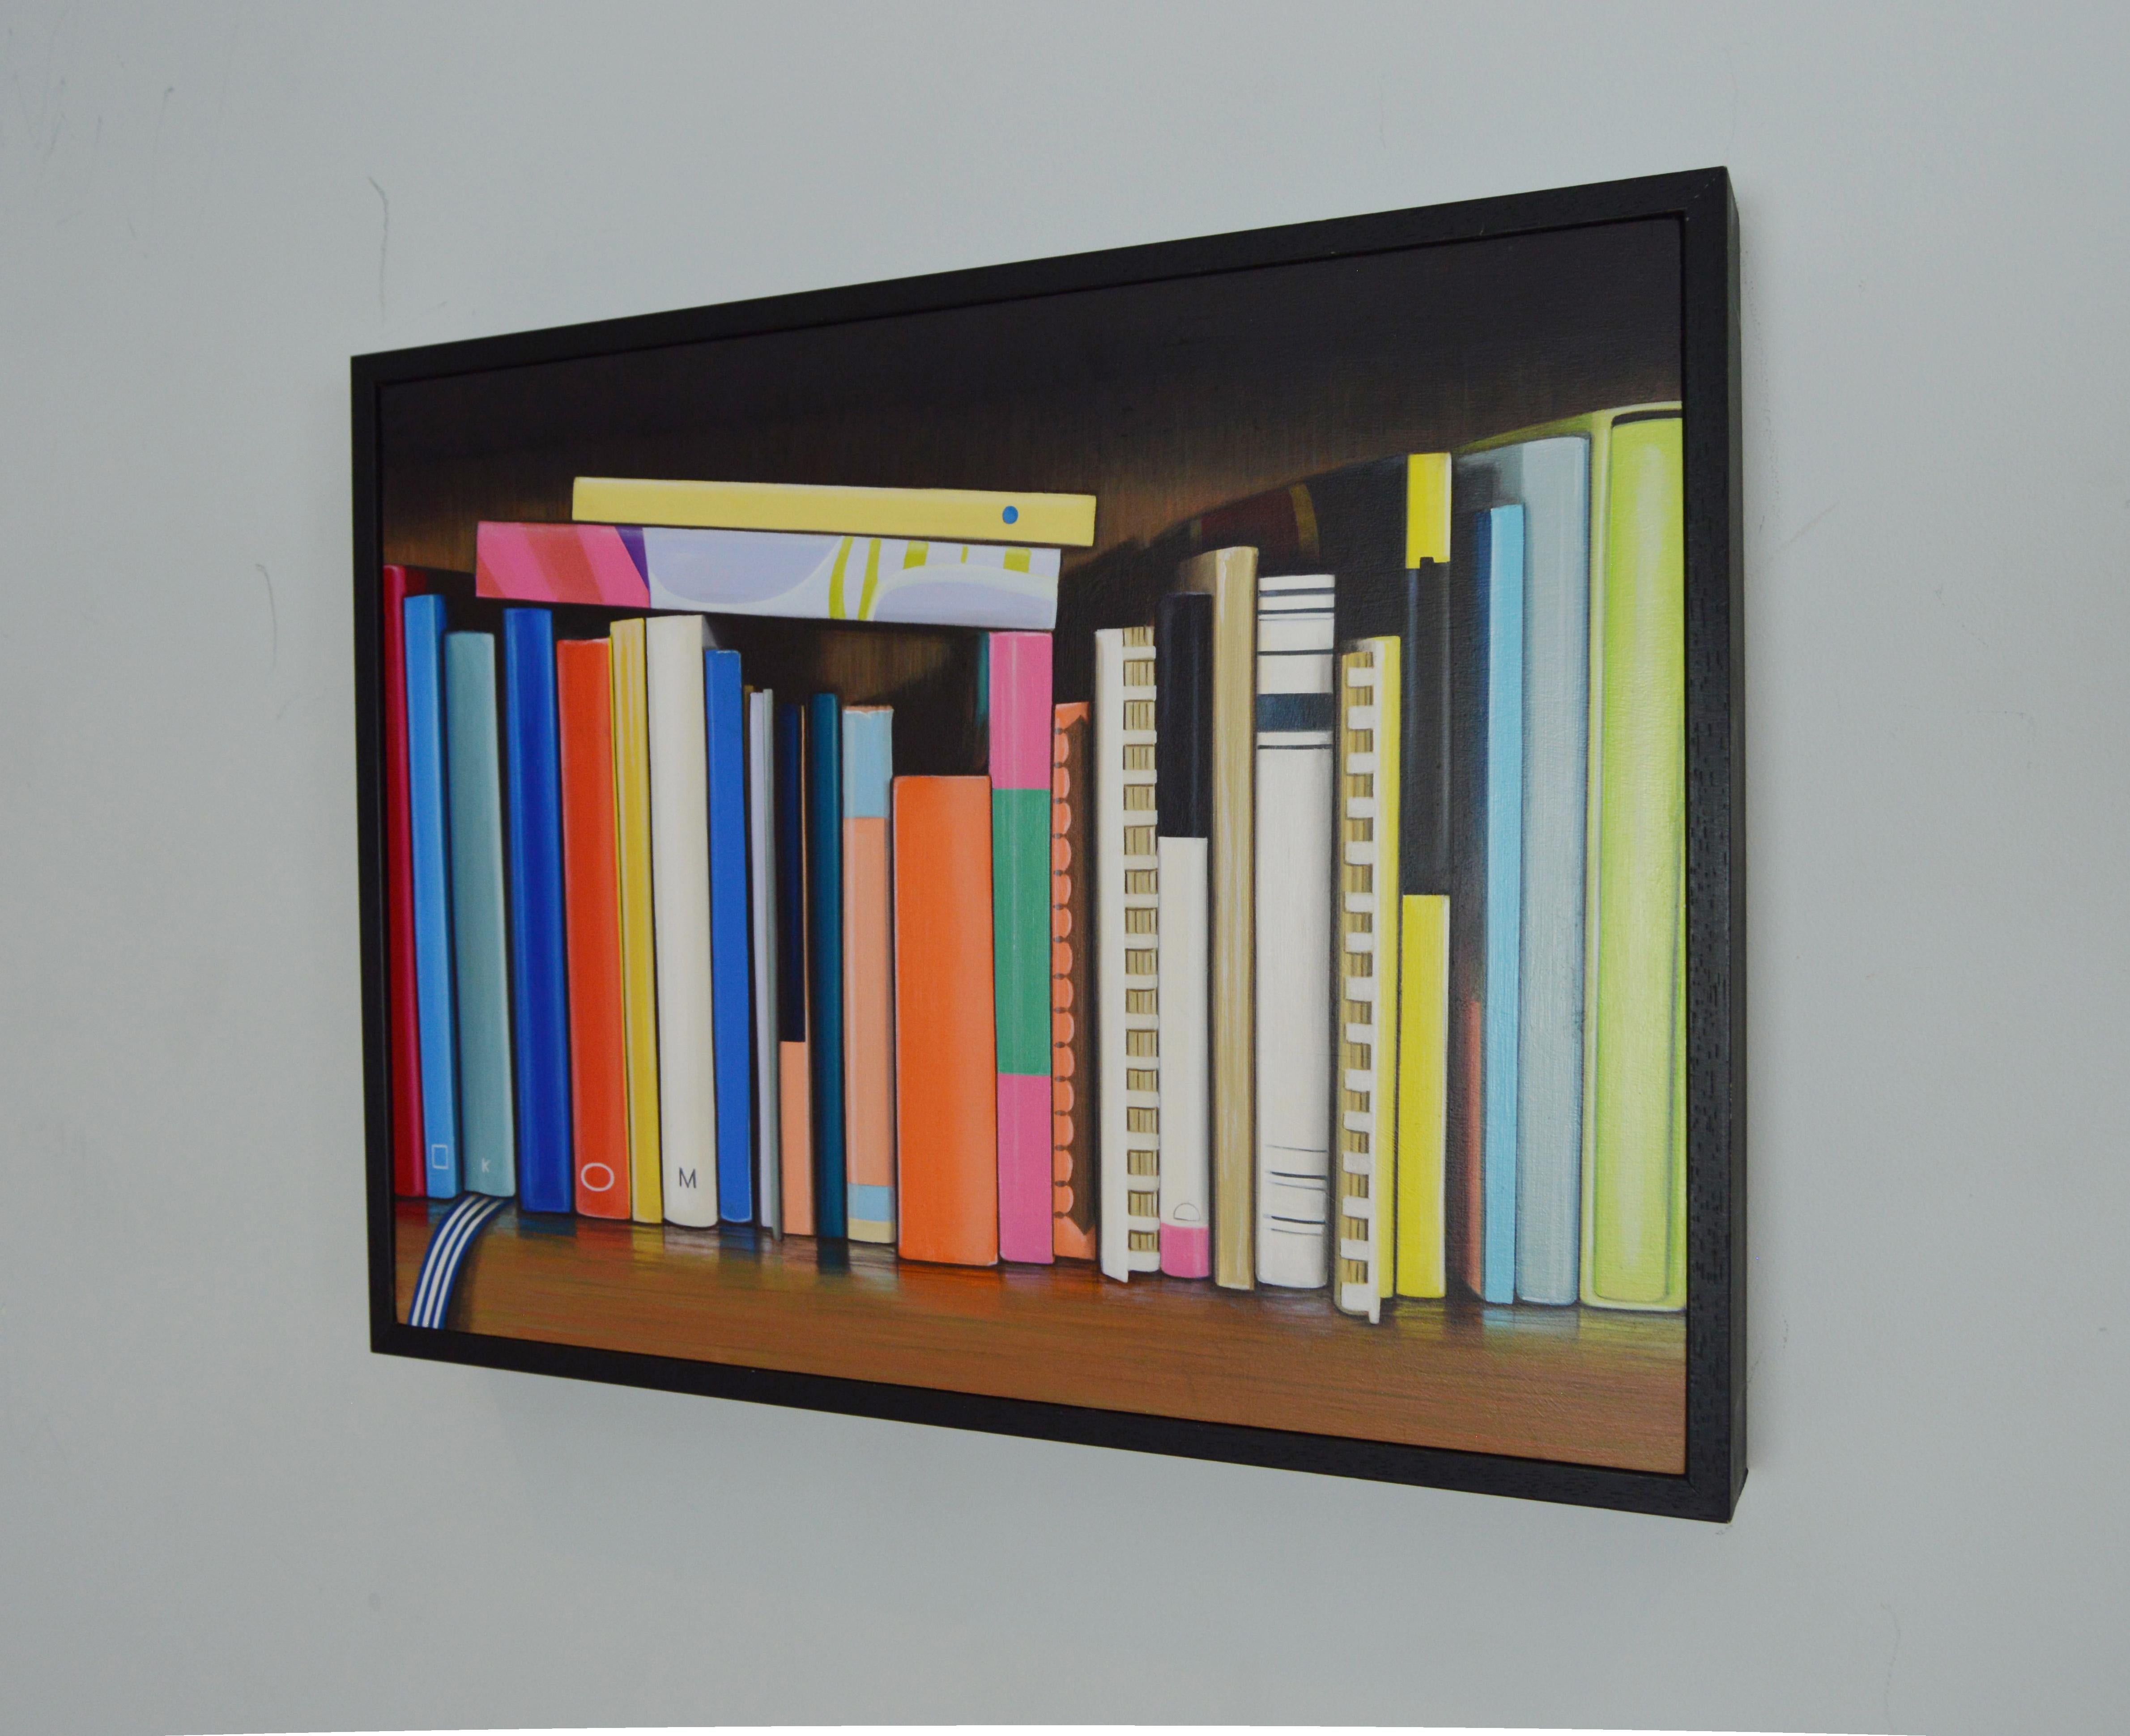 This very colourful painting of a shelf of cook books is executed in oil on a wood panel and is framed. The still-life painting was made in the Mark Hix kitchen library at the Tramshed , Shoreditch. Lettering was omitted in order to highlight the